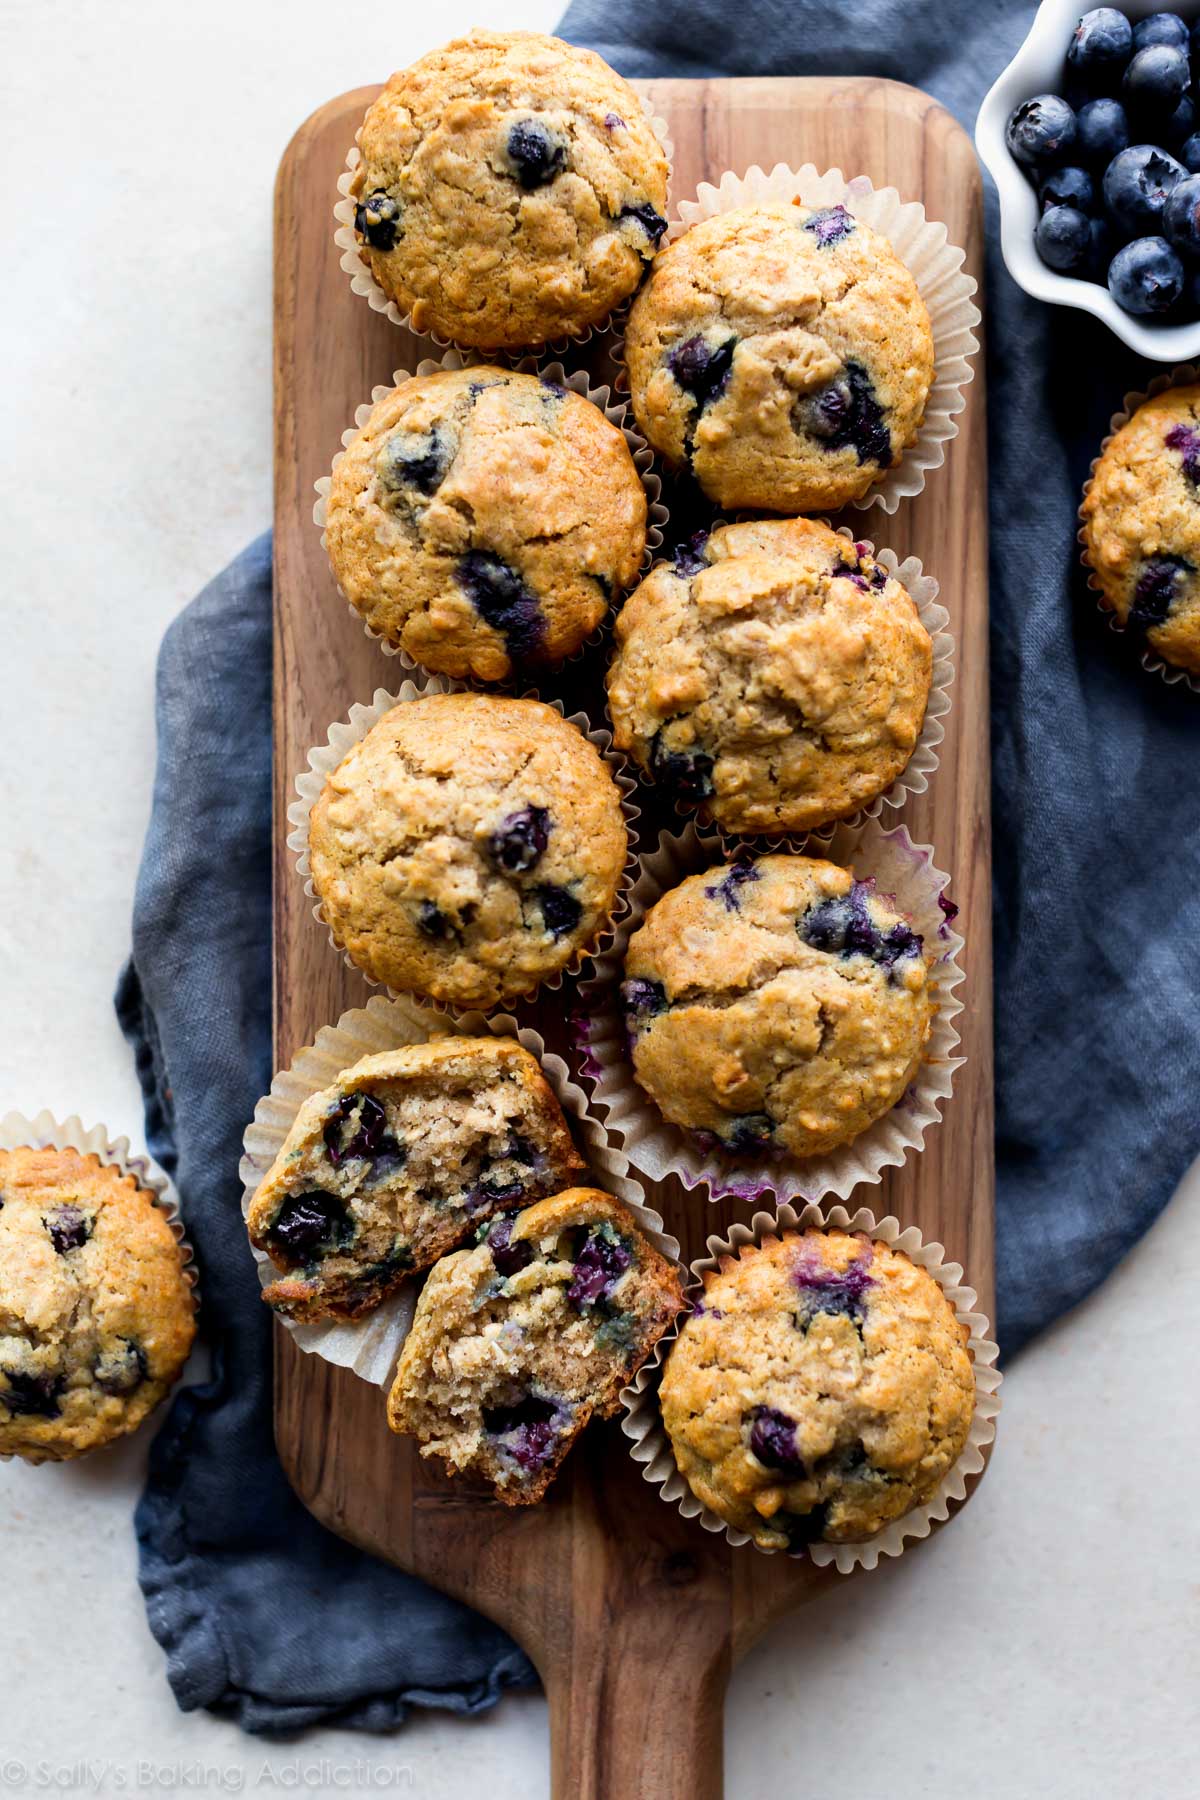 Blueberry oatmeal muffins on wood board